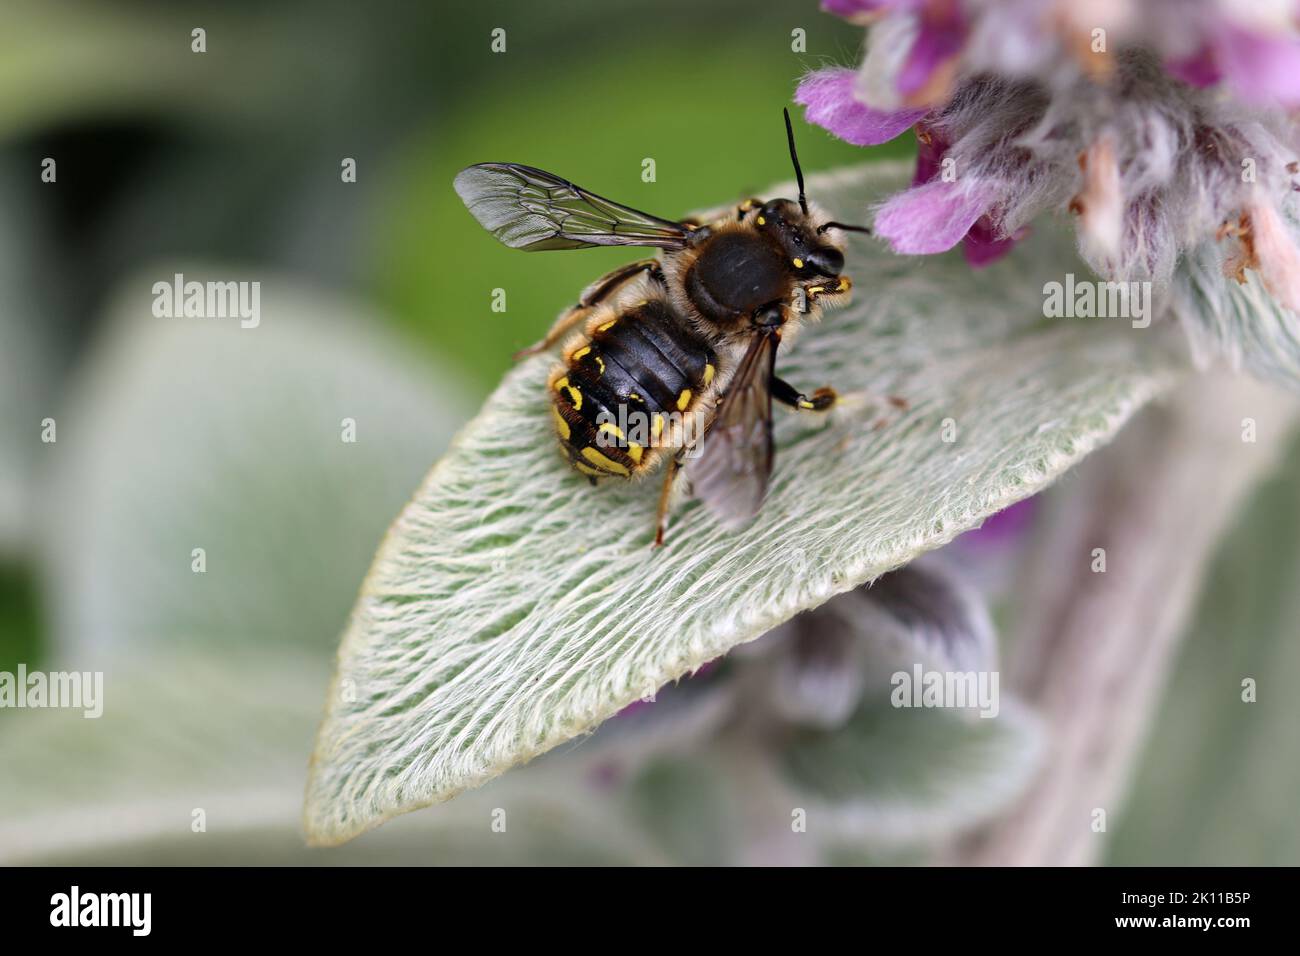 Wool carder bee, Anthidium manicatum, male on woolly lambs ear, Stachys byzantina, plant leaf with a blurred background of leaves. Stock Photo